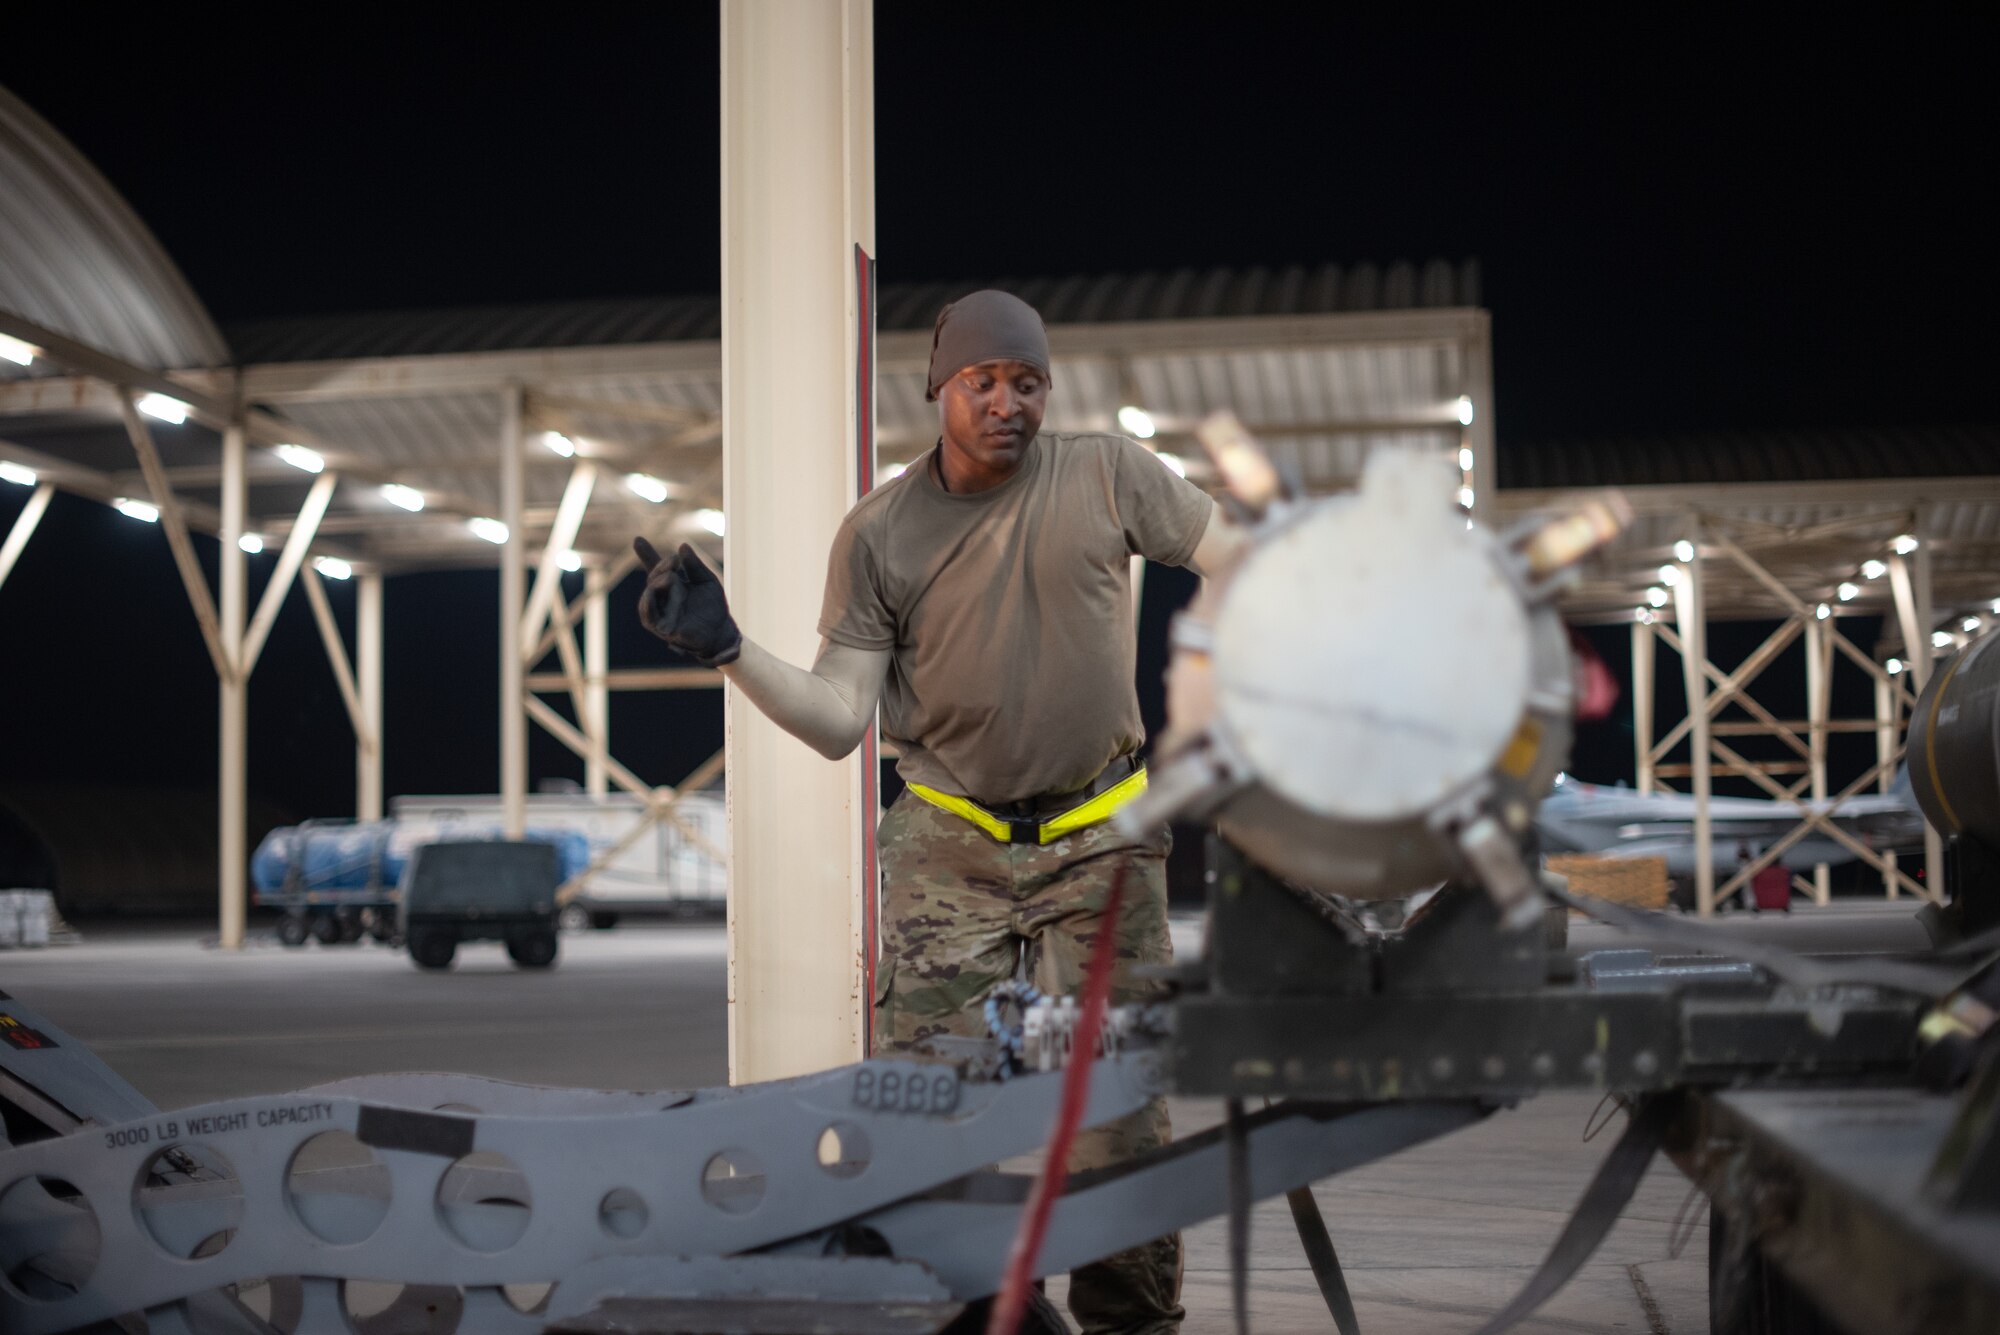 Staff Sgt. Kiefer May, 380th Expeditionary Aircraft Maintenance Squadron weapons load crew team chief, guides the lift operator July 15, 2019, at Al Dhafra Air Base, United Arab Emirates. Weapons load crews work 24/7 operations to support loading and configuring various munitions for the F-35A Lightning II, F-15E Strike Eagle and F-15C Eagle jets at ADAB. (U.S. Air Force photo by Staff Sgt. Chris Thornbury)